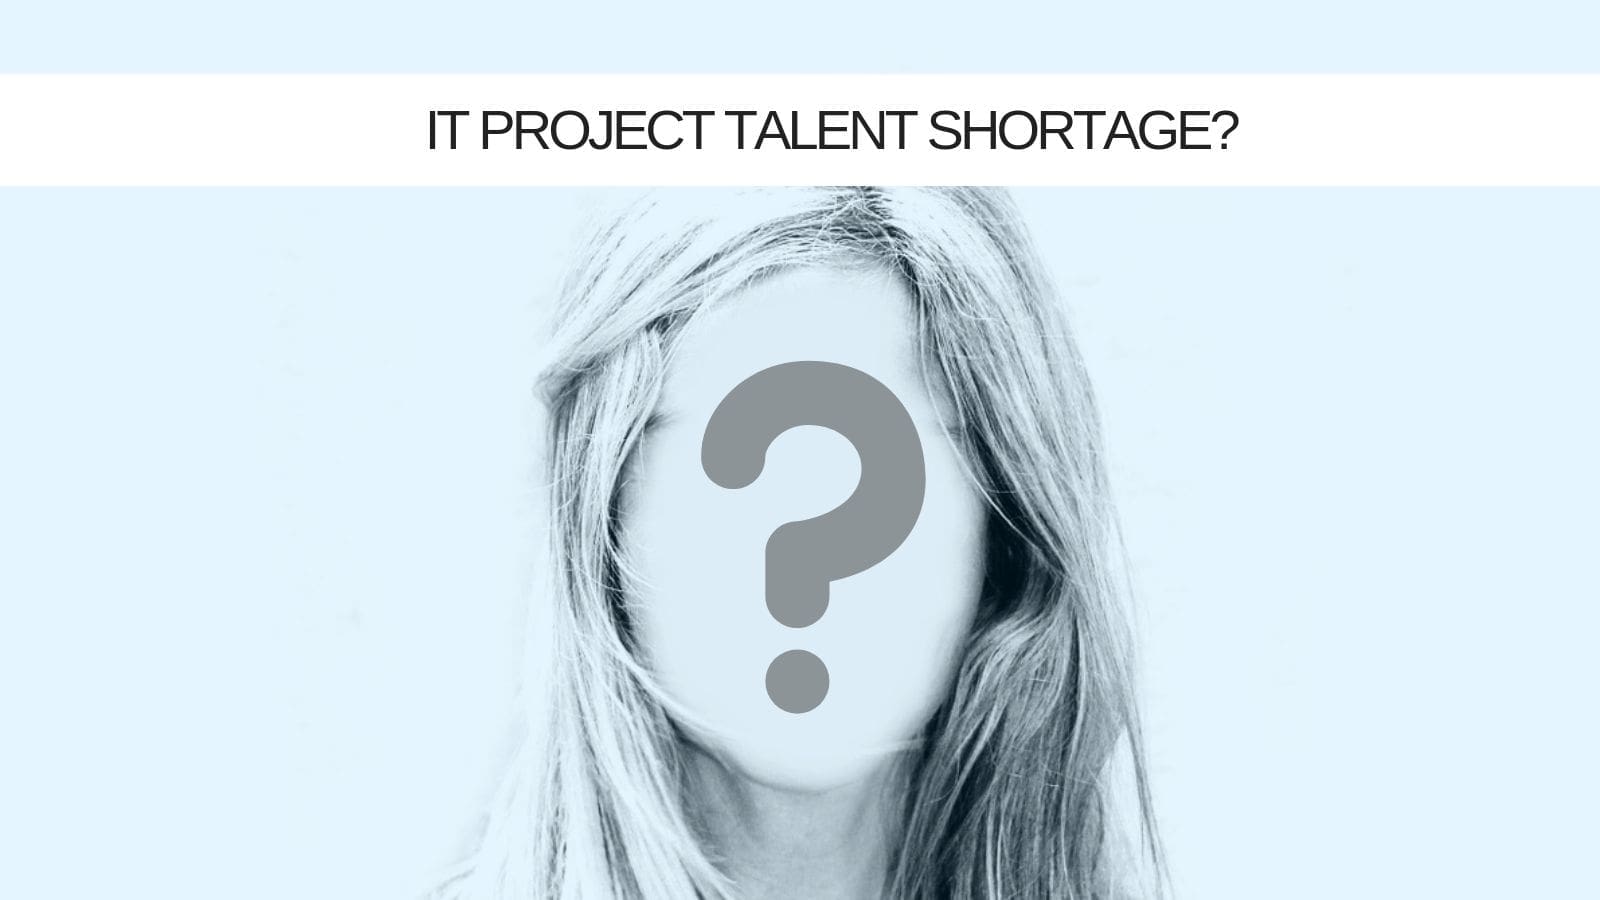 IT Project Talent shortage. Is PMaaS plugging the gap?